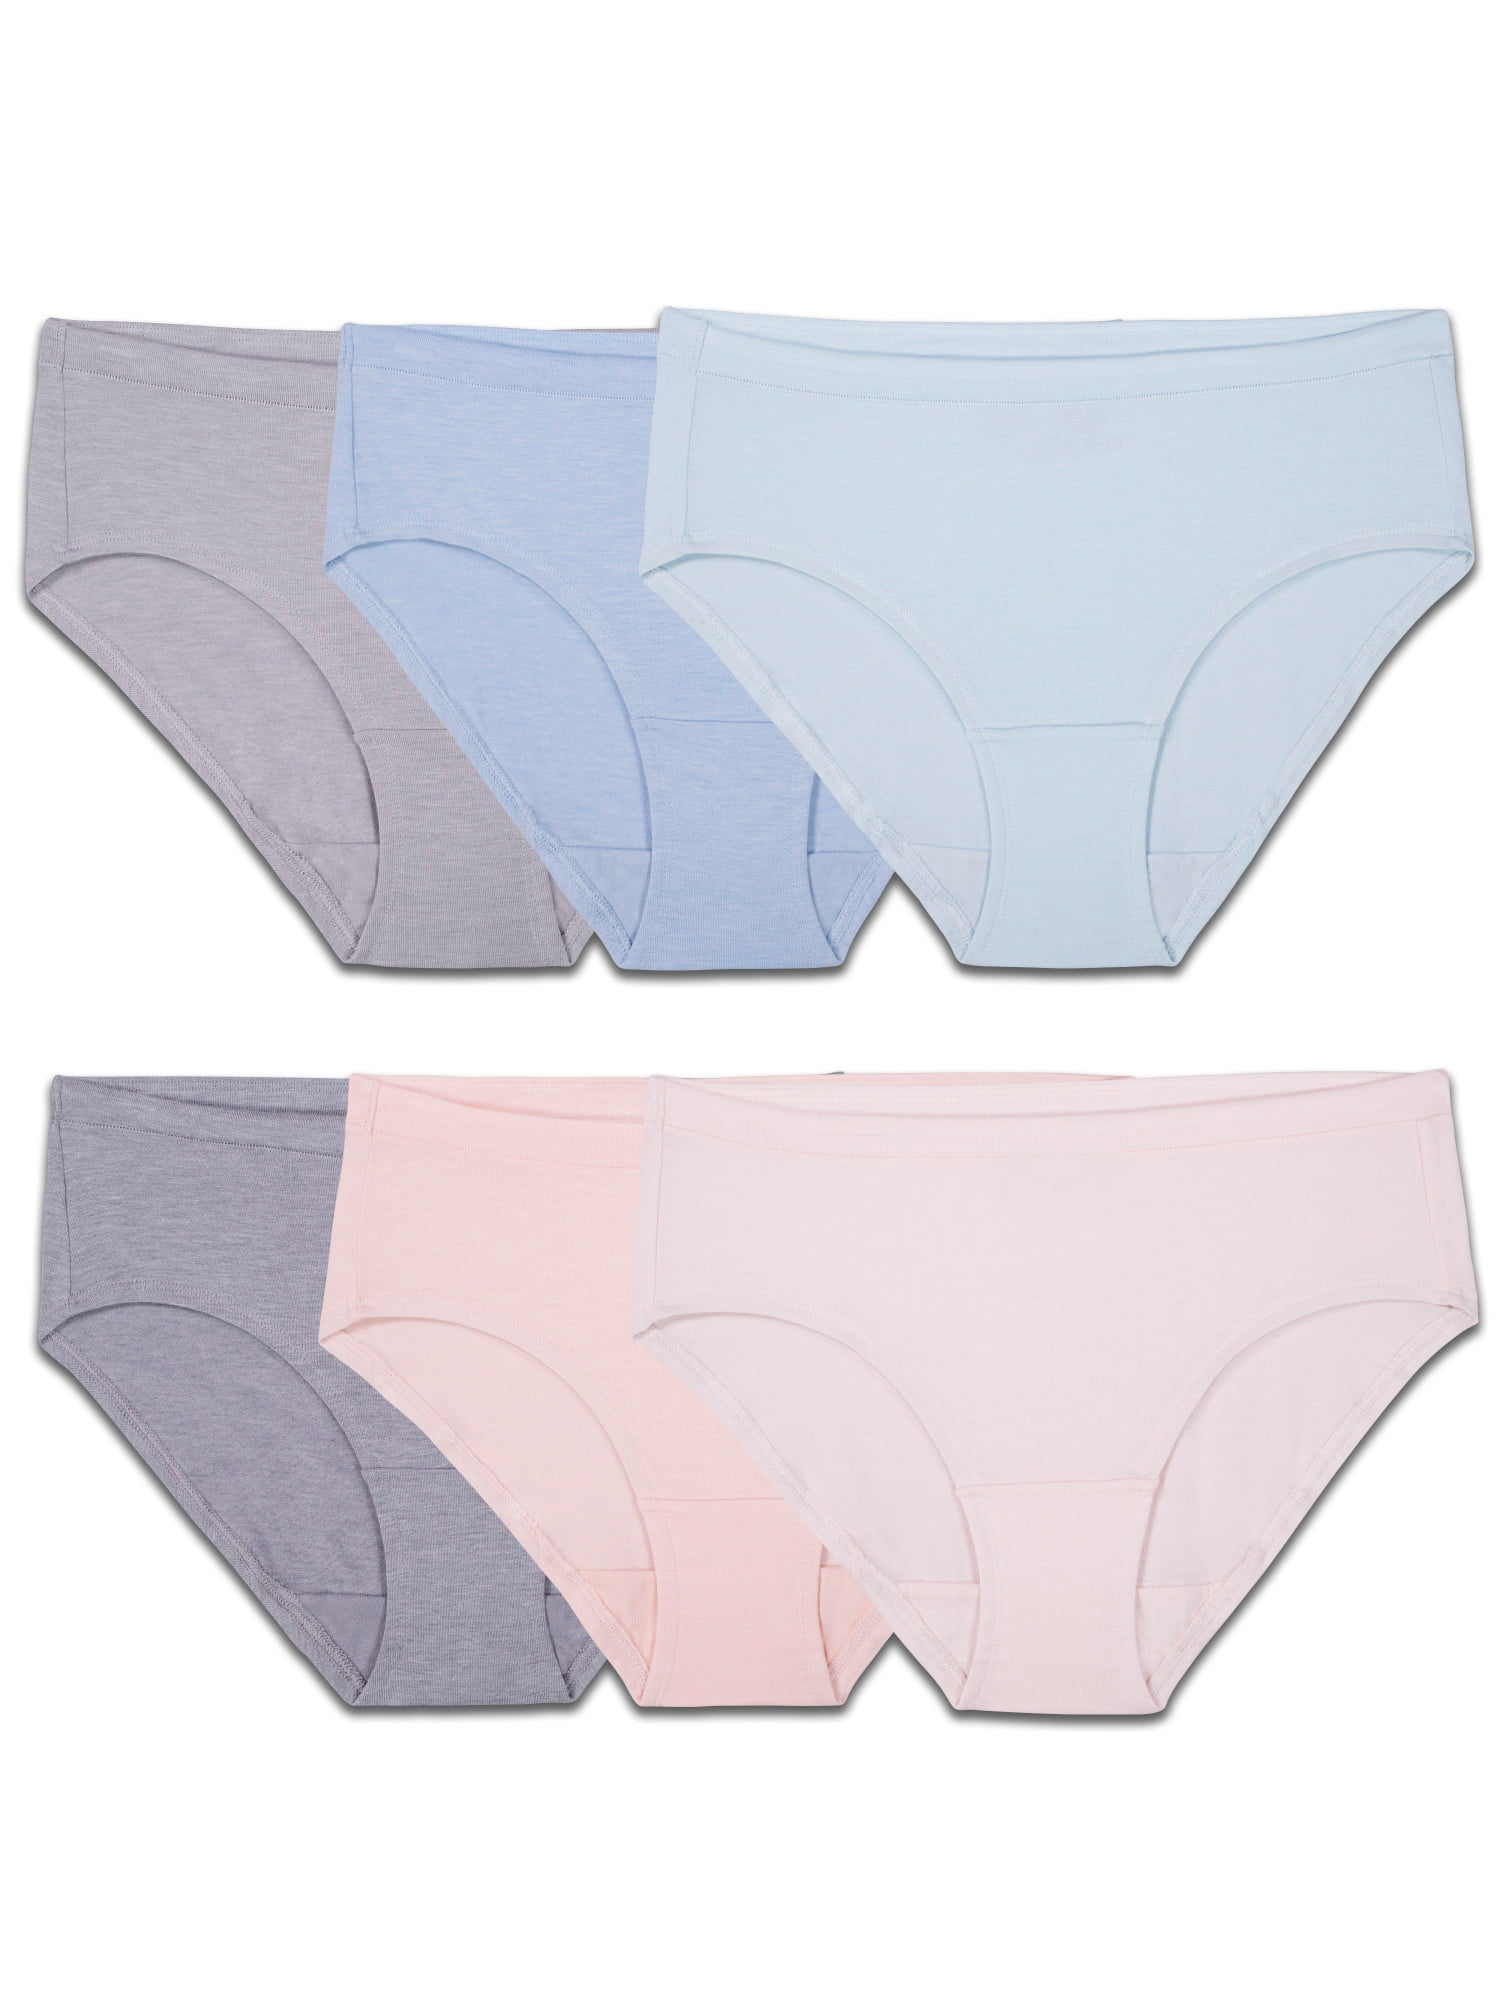 6 Pack or 5 Pack Popular Girls Cotton Hipster Underwear Panty 